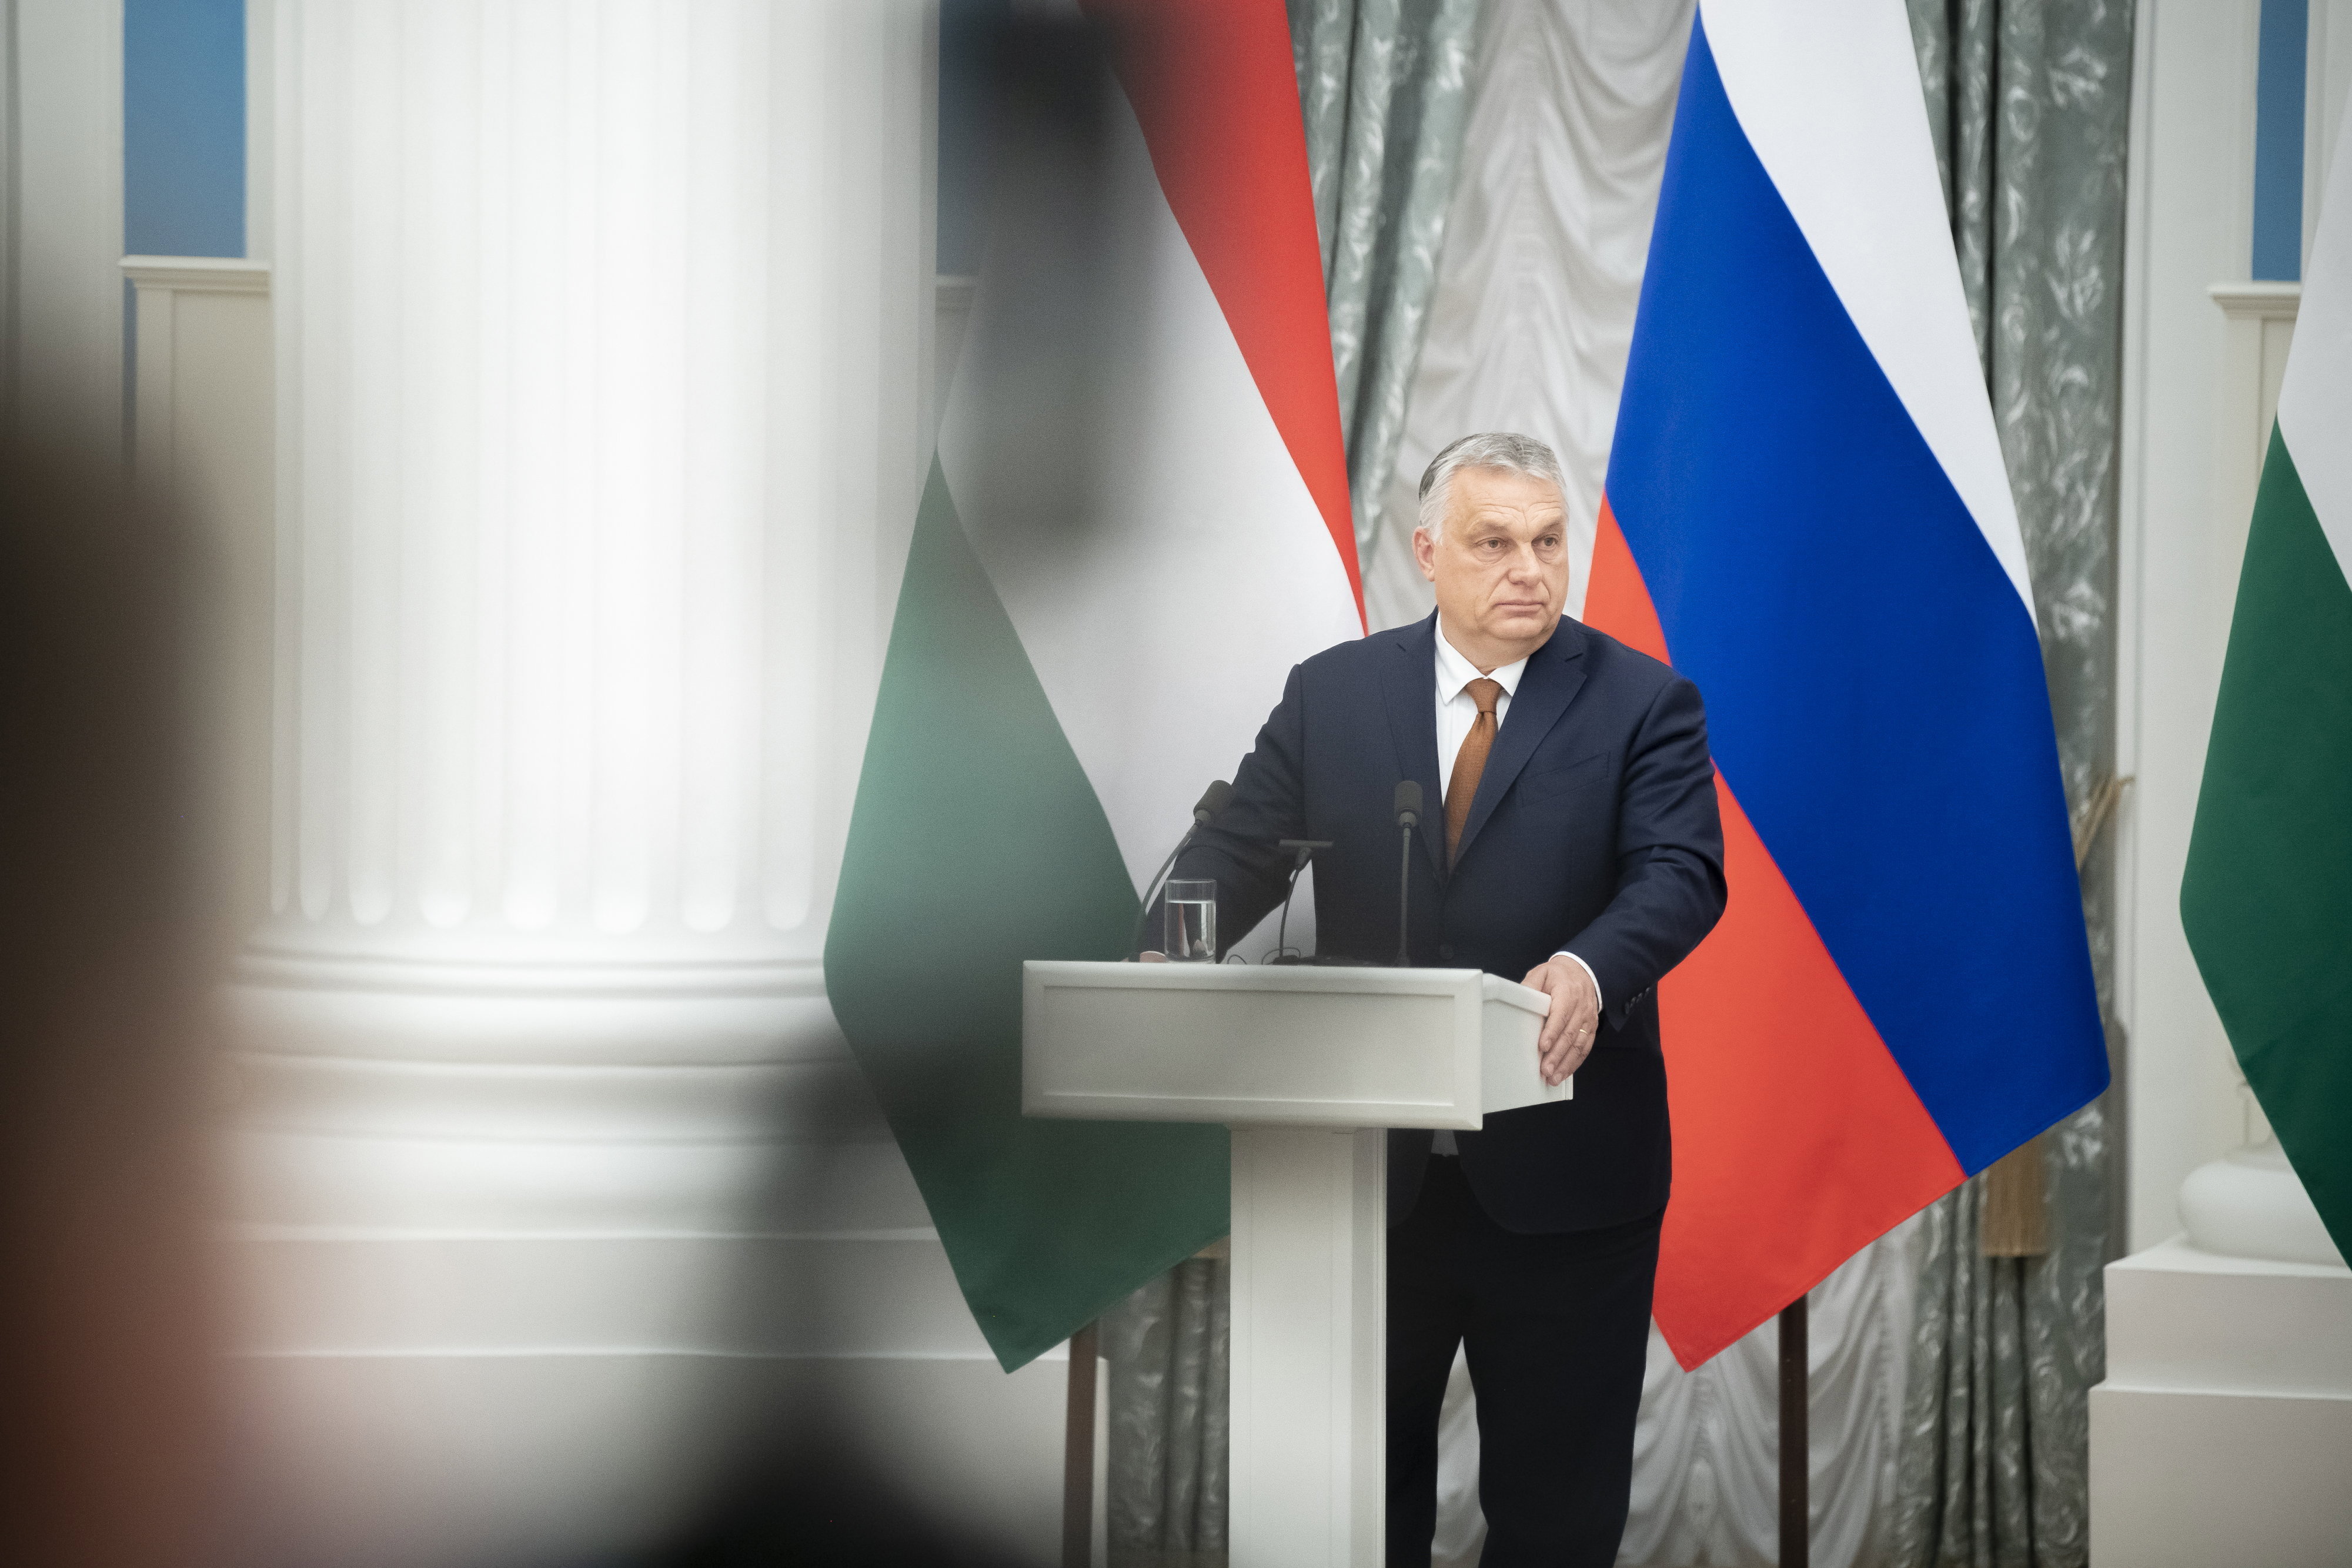 PM Orbán: With Russian Gas, Utility Bills Can Be Kept Low